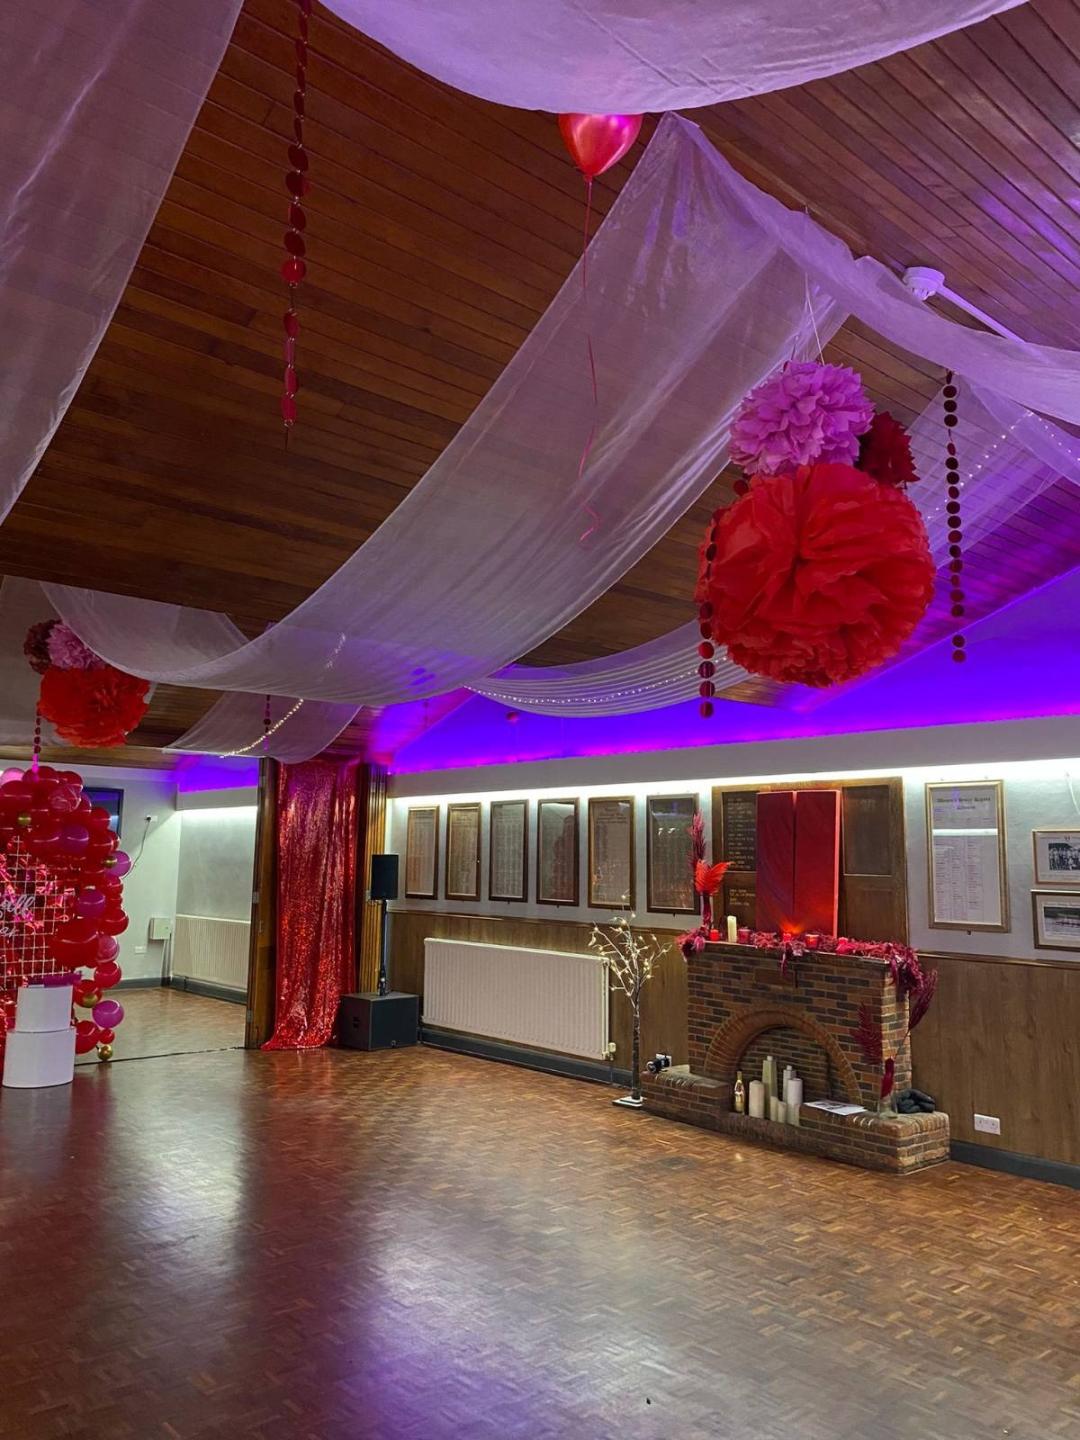 A hall with wooden floor and ceilings draped with white fabric and red decorations. There is a brick fireplace against the wall.